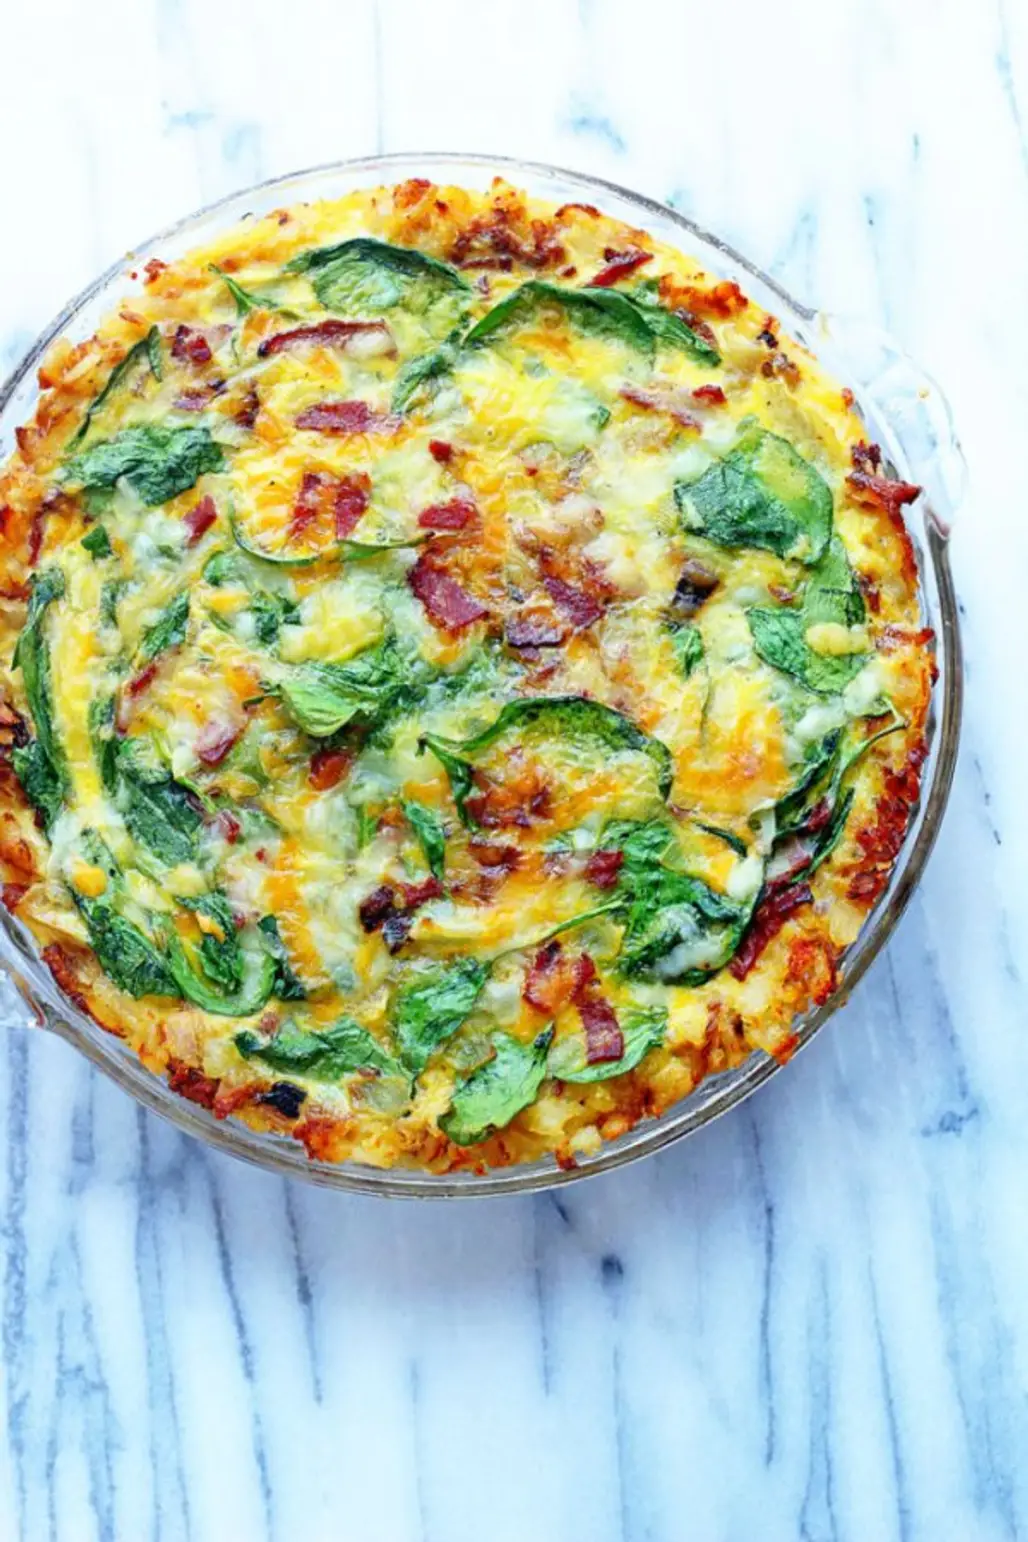 Whisk Leftovers into Omelets or Frittatas on the Weekend for Brunch